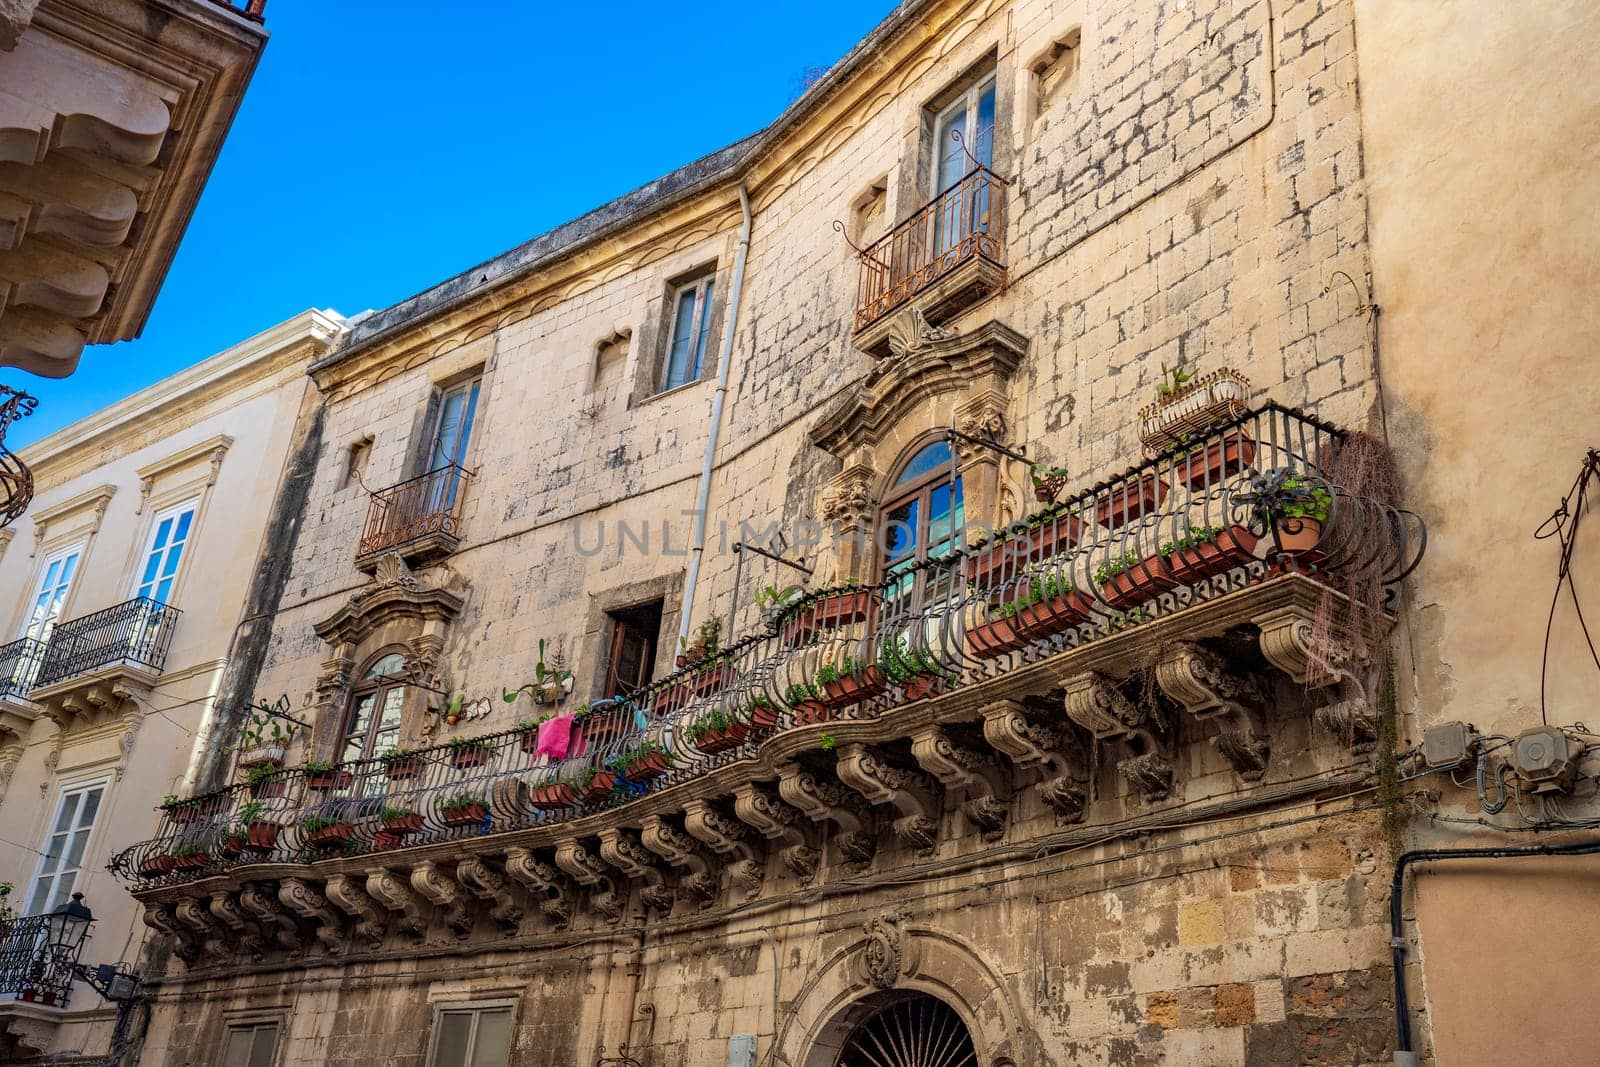 Sicily. One of the spectacular balconies in the city is an example of the Sicilian baroque style.